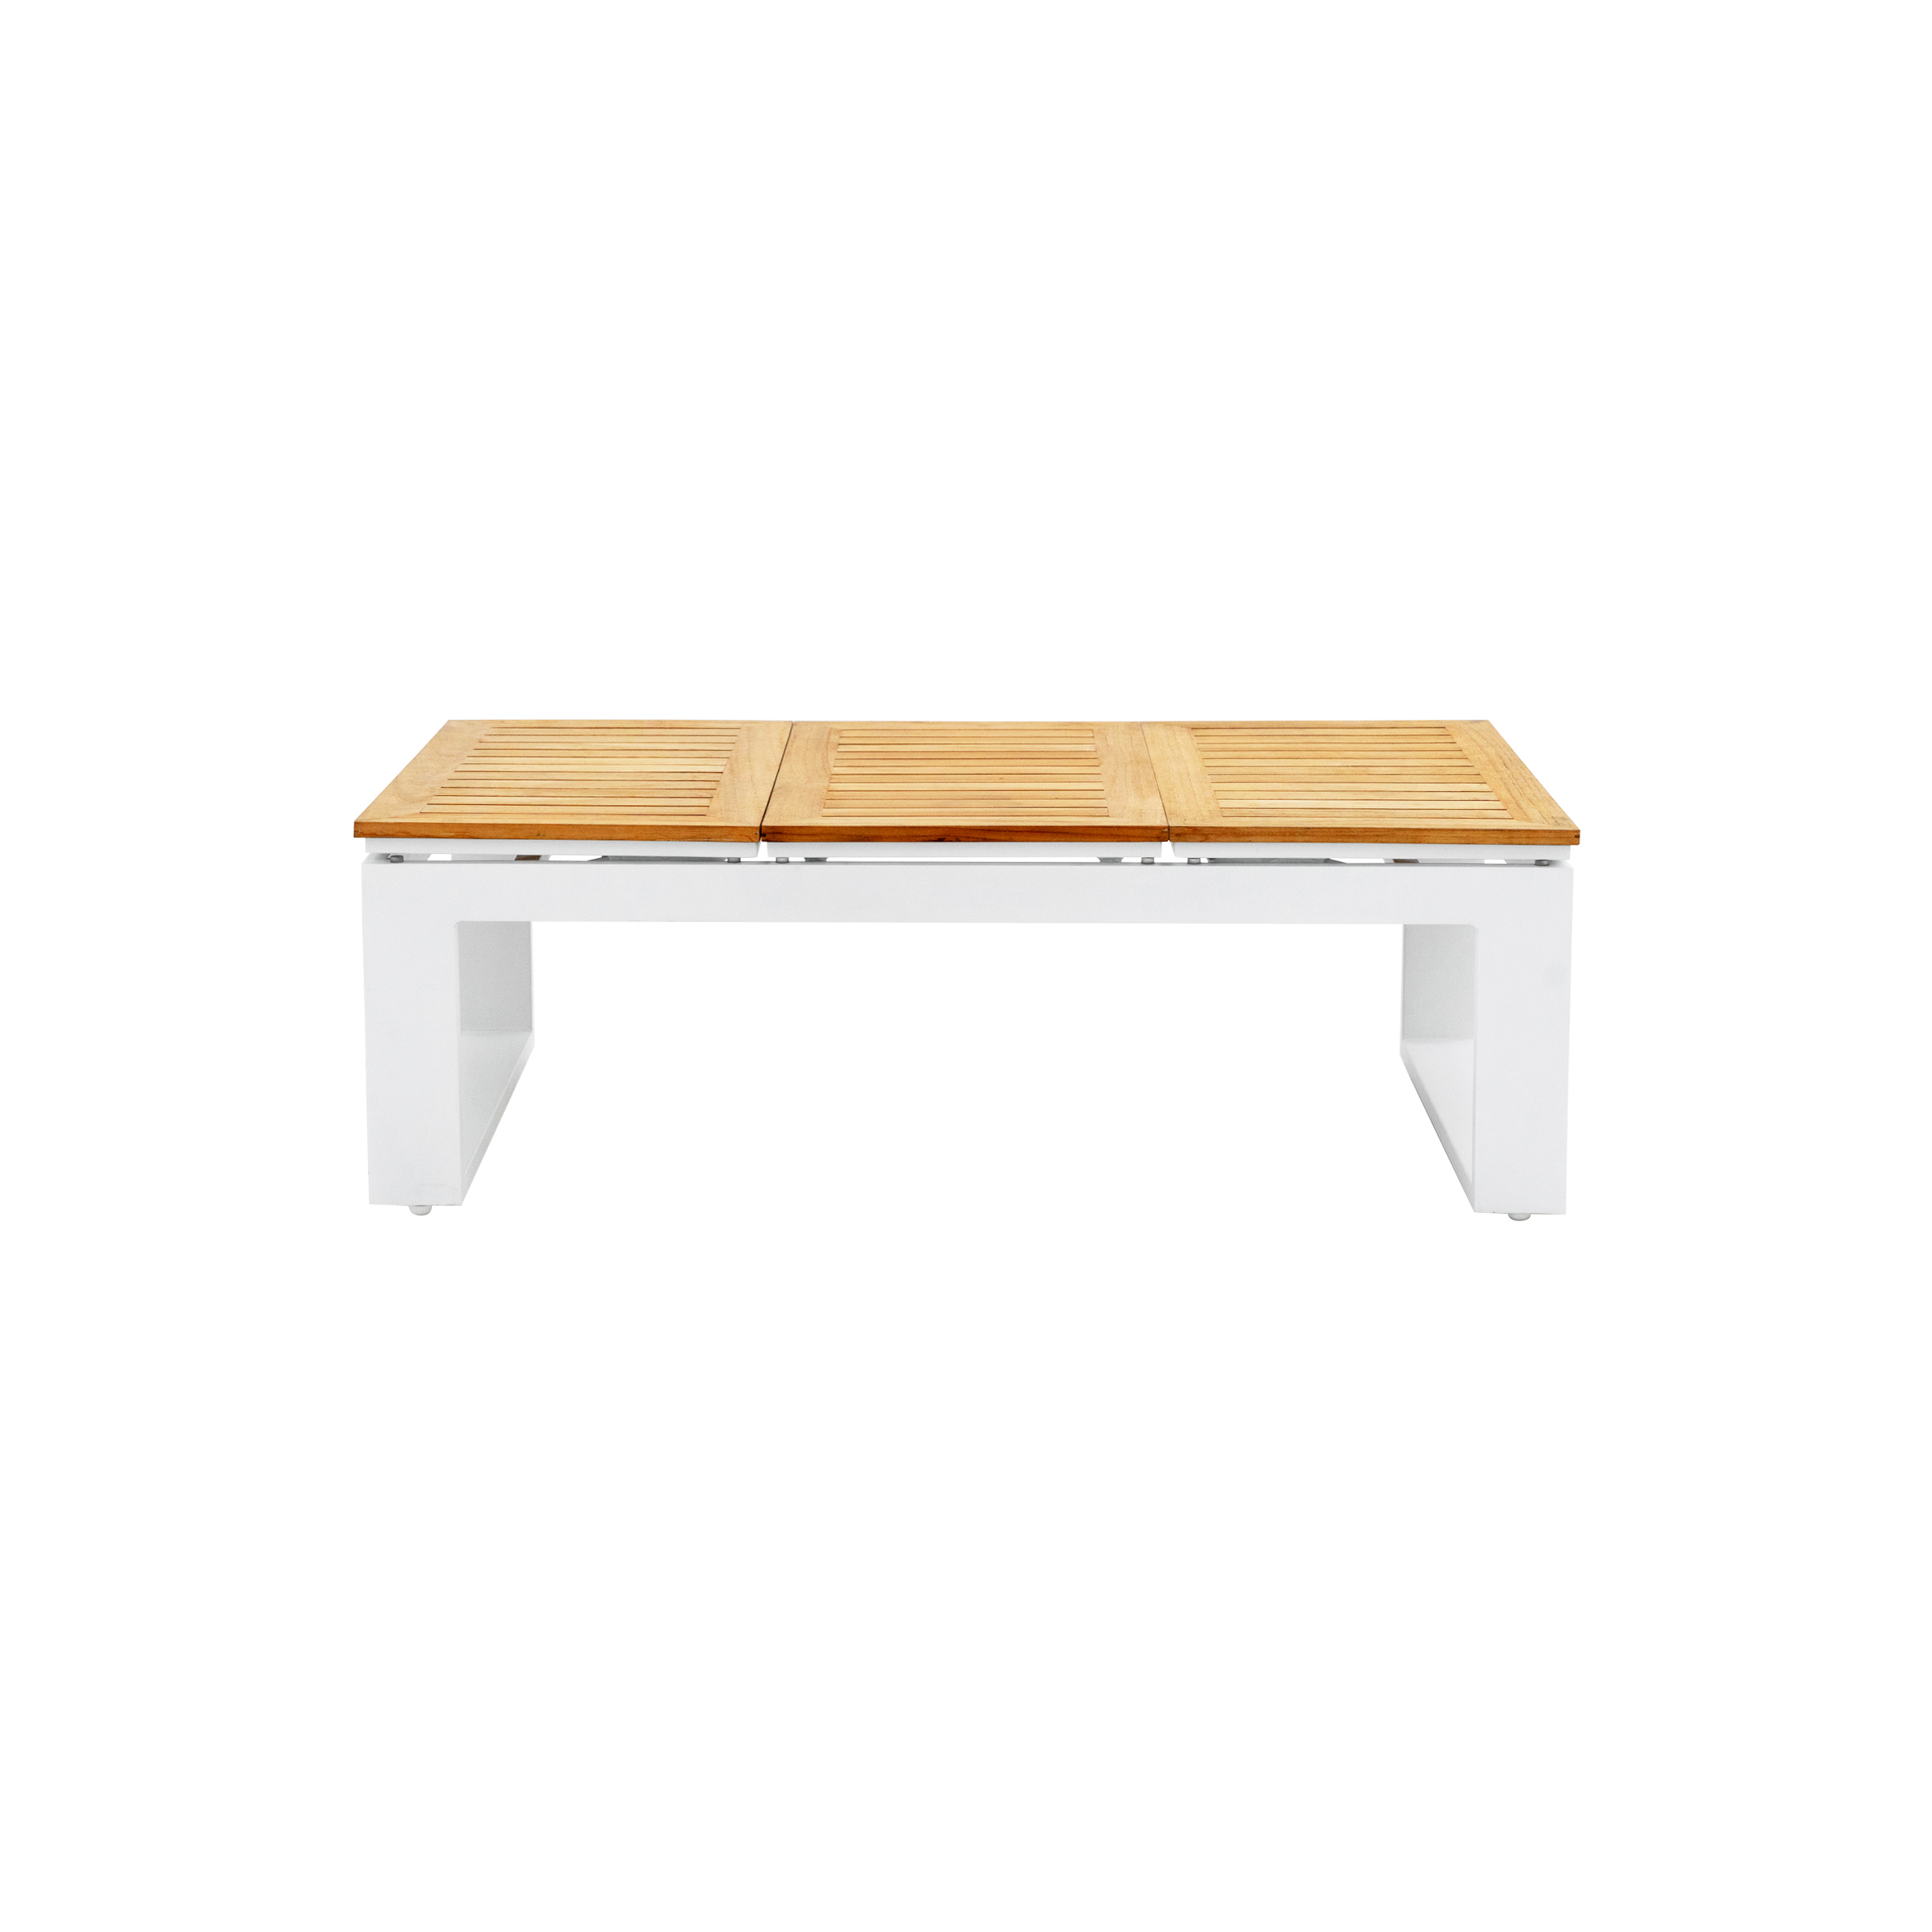 Para functional coffee table S2